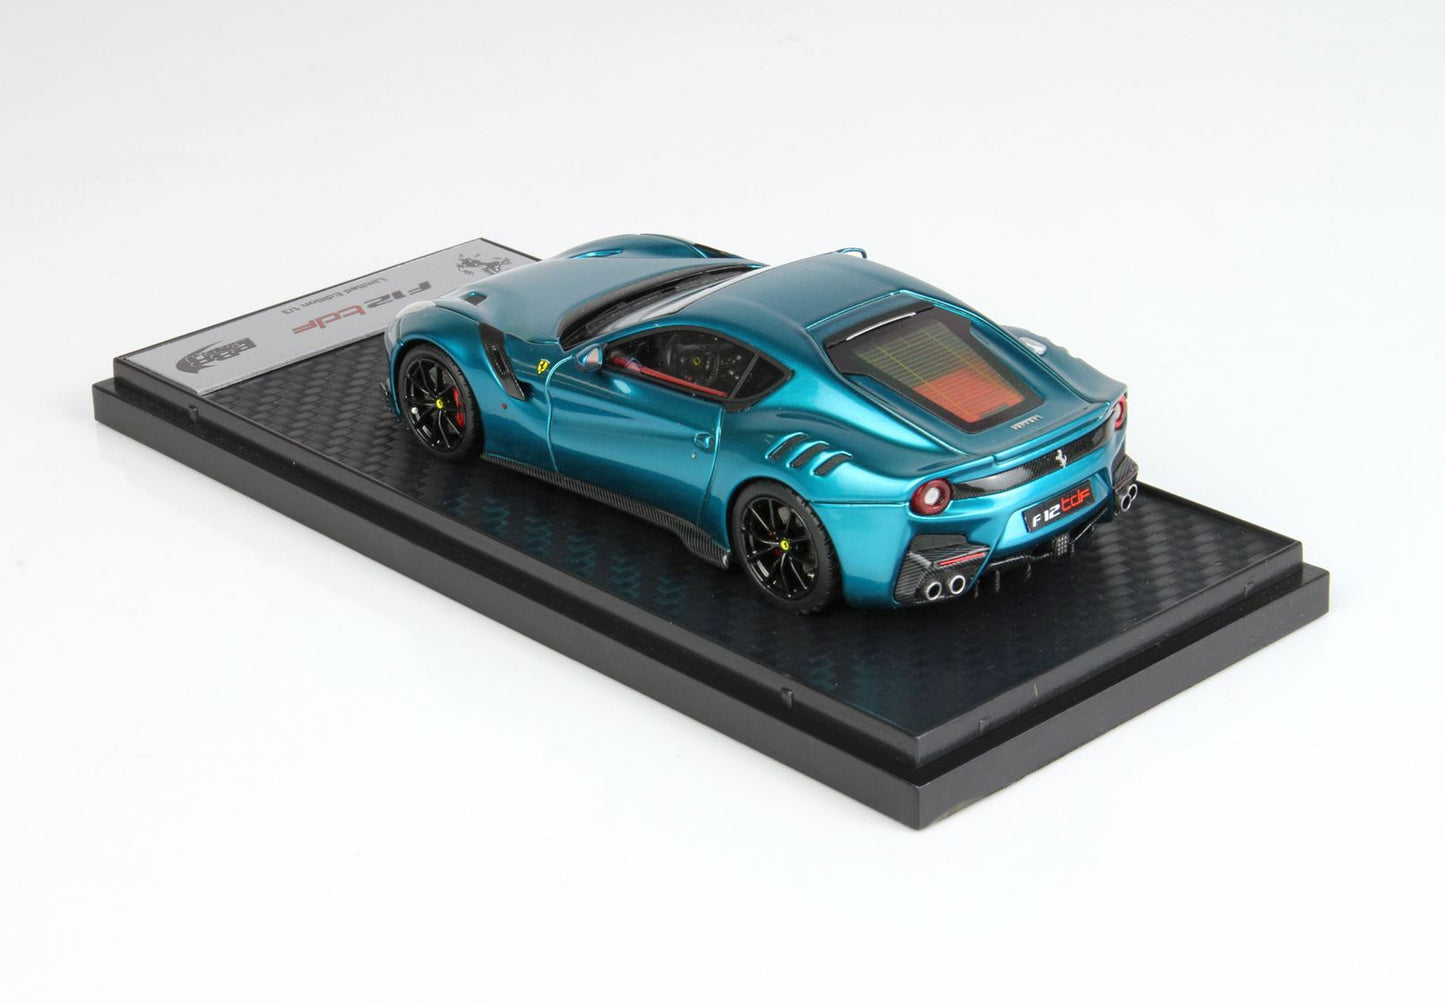 BBR 1/43 Ferrari F12 TDF chrome blue - Padua Exhibition Exclusive - 3 Pieces Produced Only